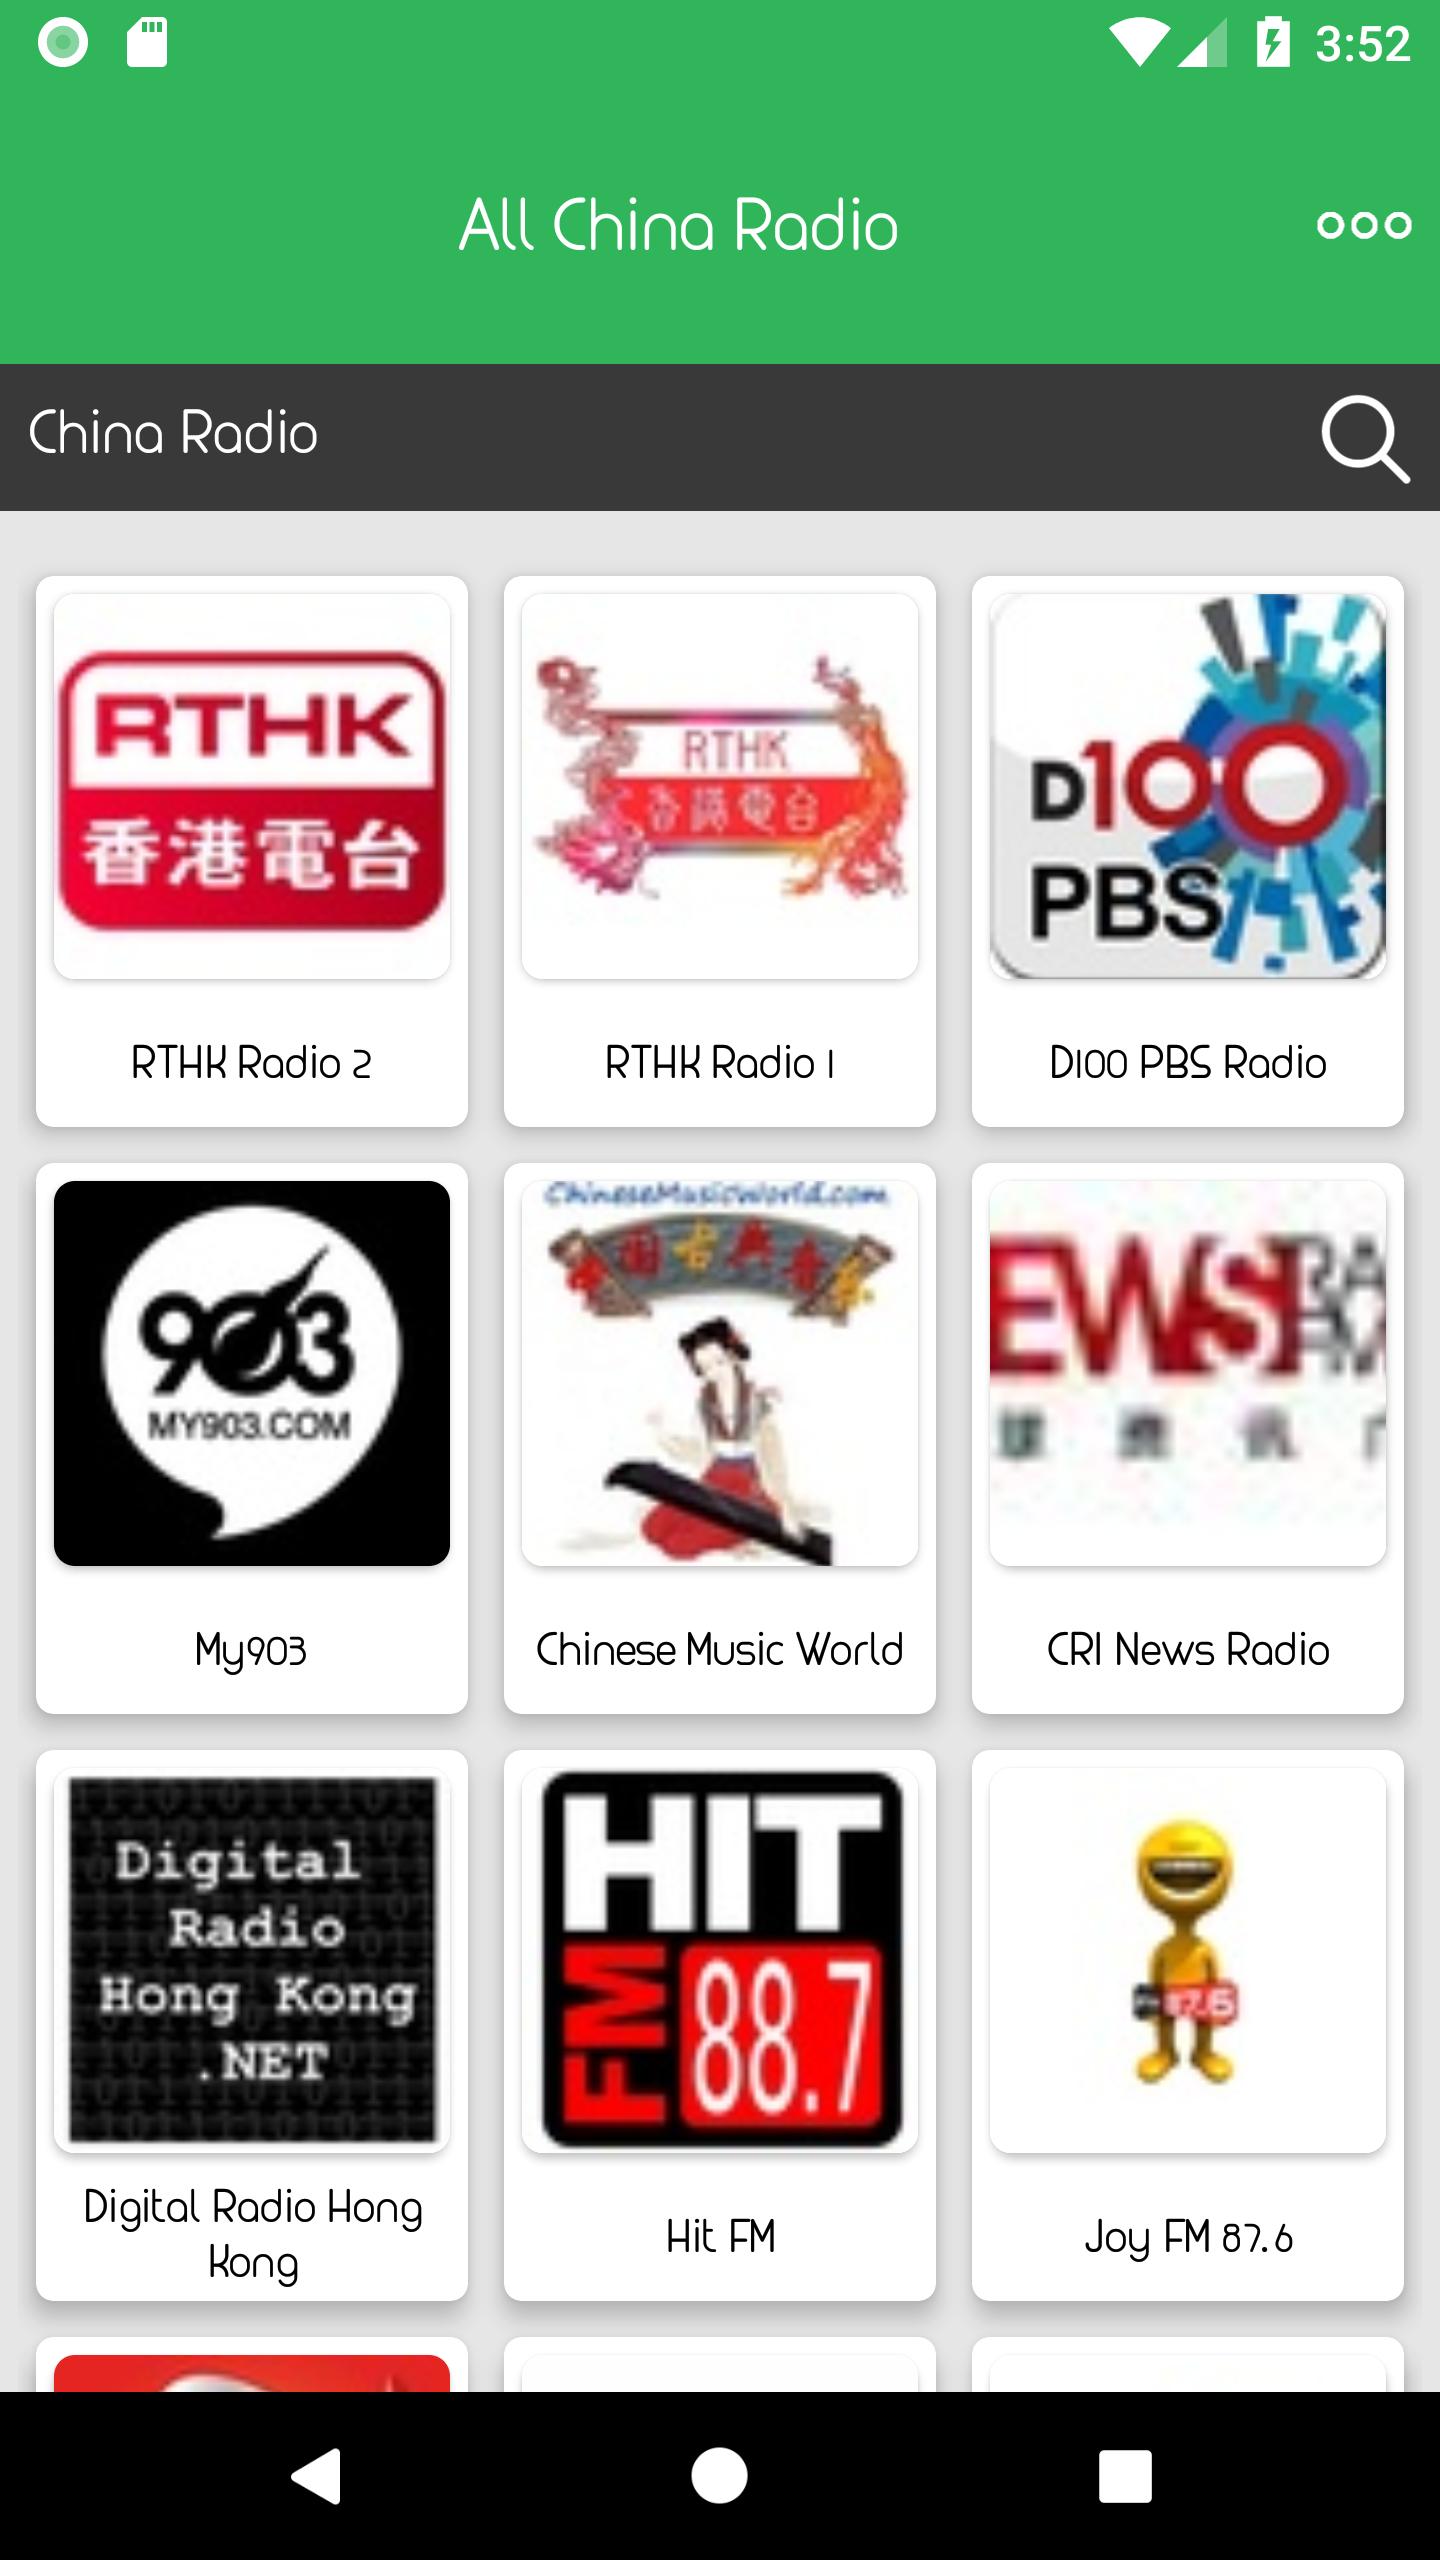 China Radio for Android - APK Download